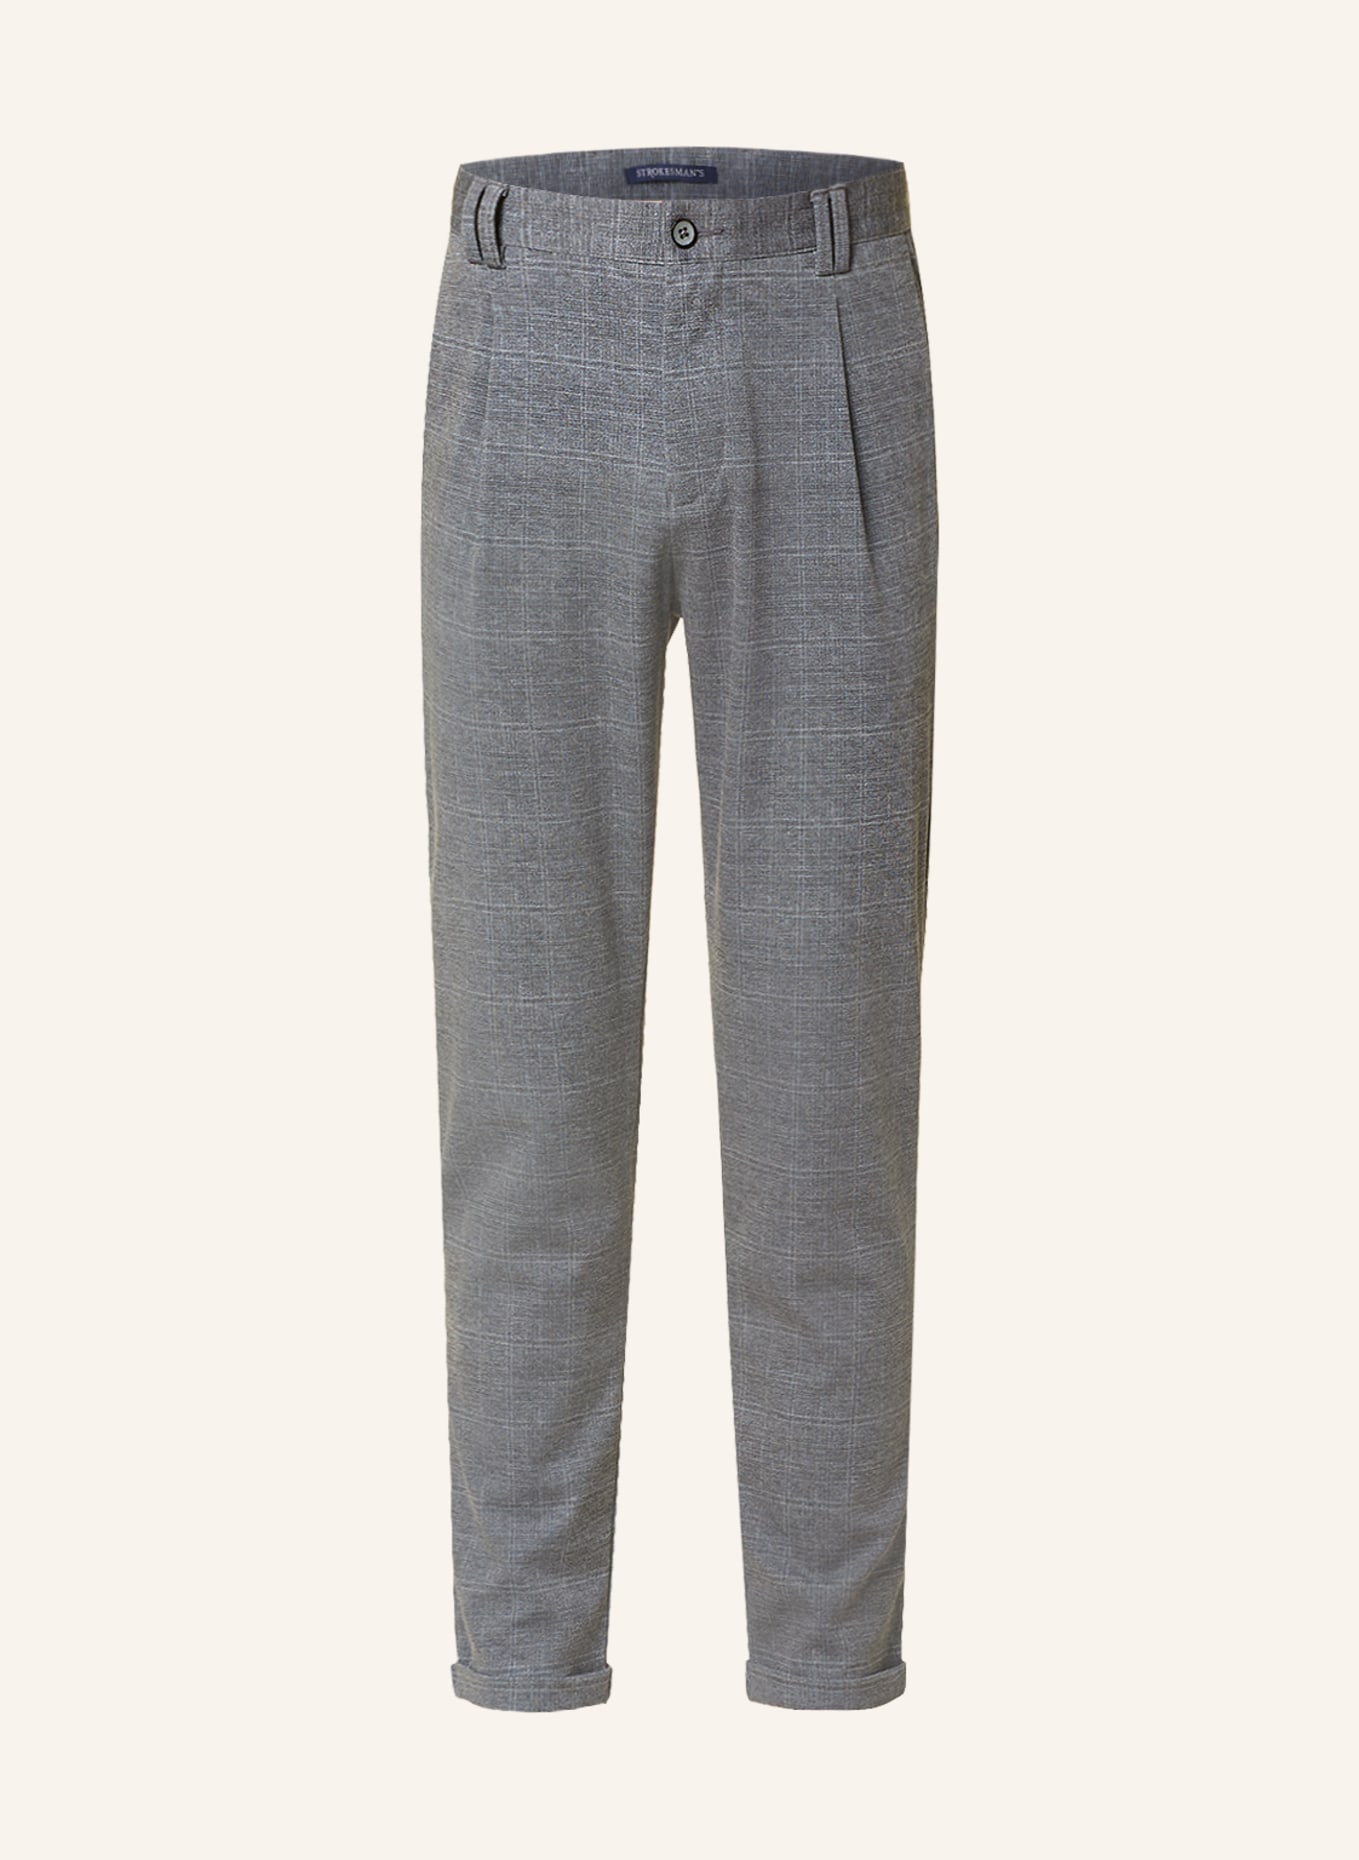 STROKESMAN'S Trousers comfort fit, Color: GRAY (Image 1)